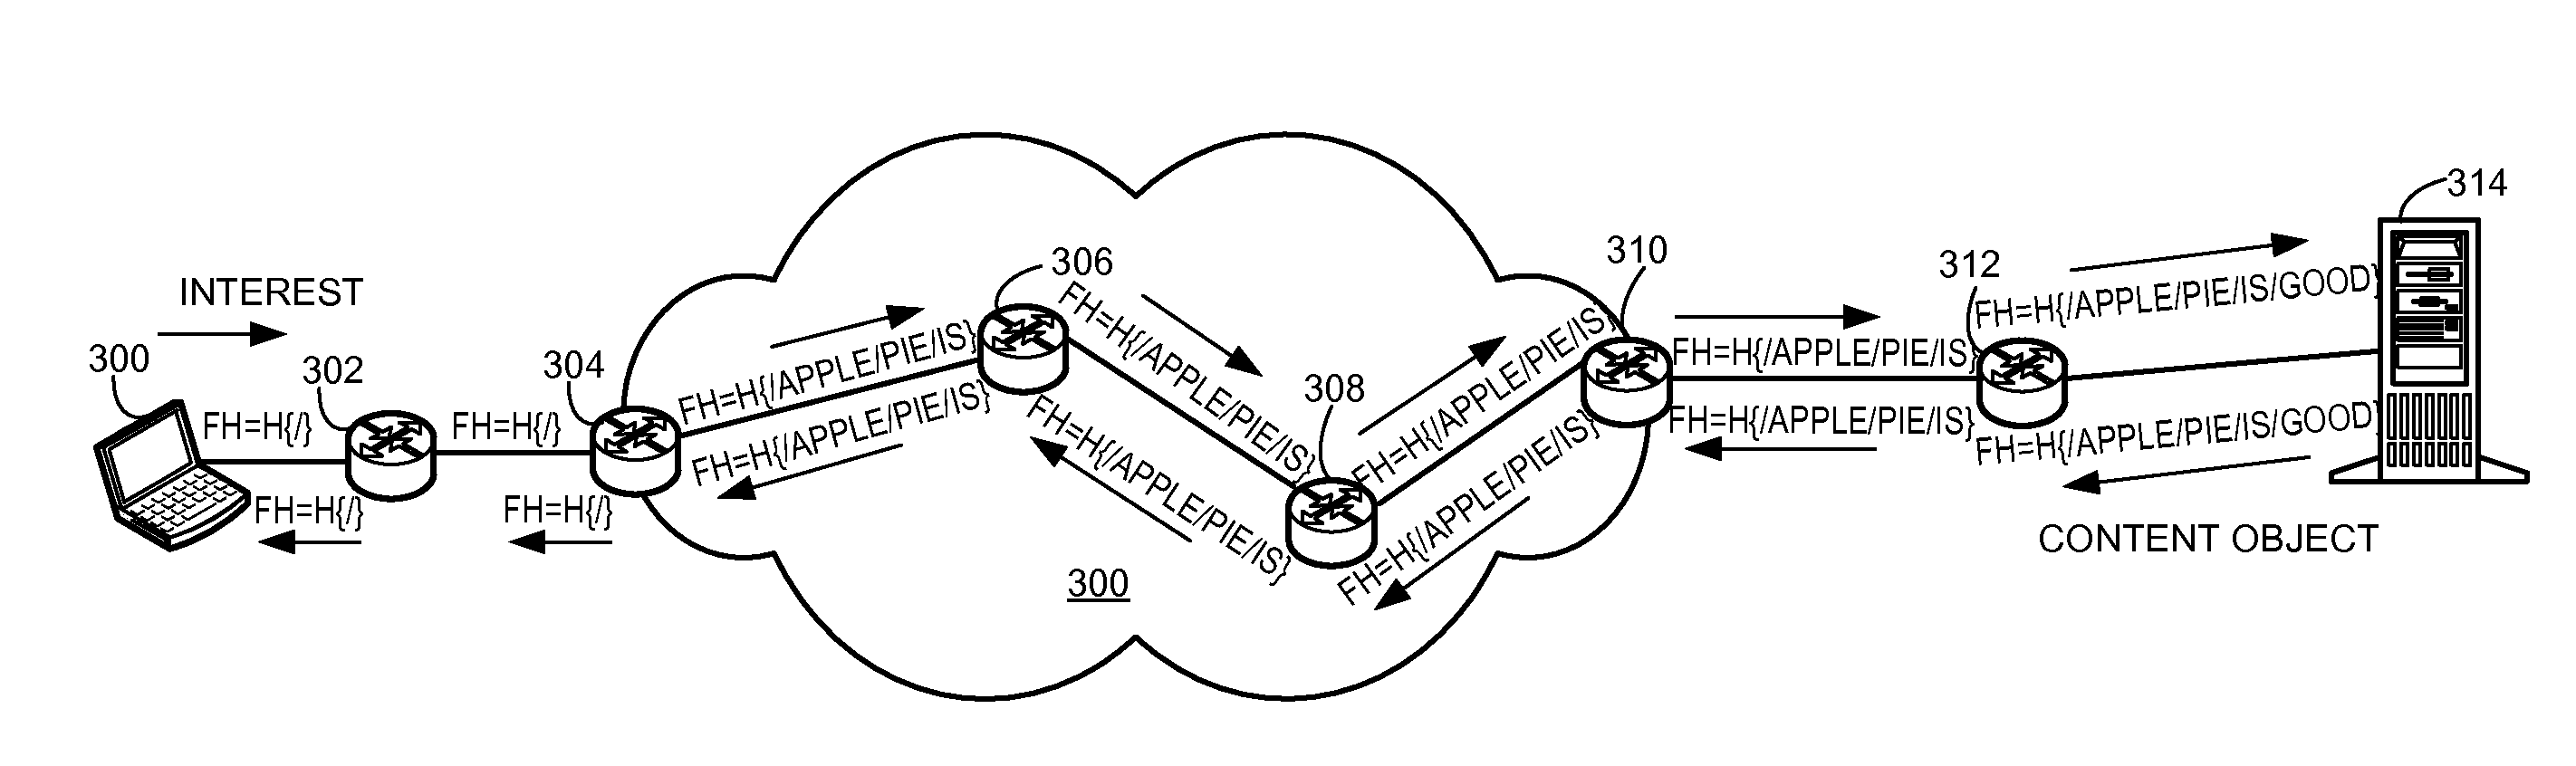 System and method for minimum path mtu discovery in content centric networks